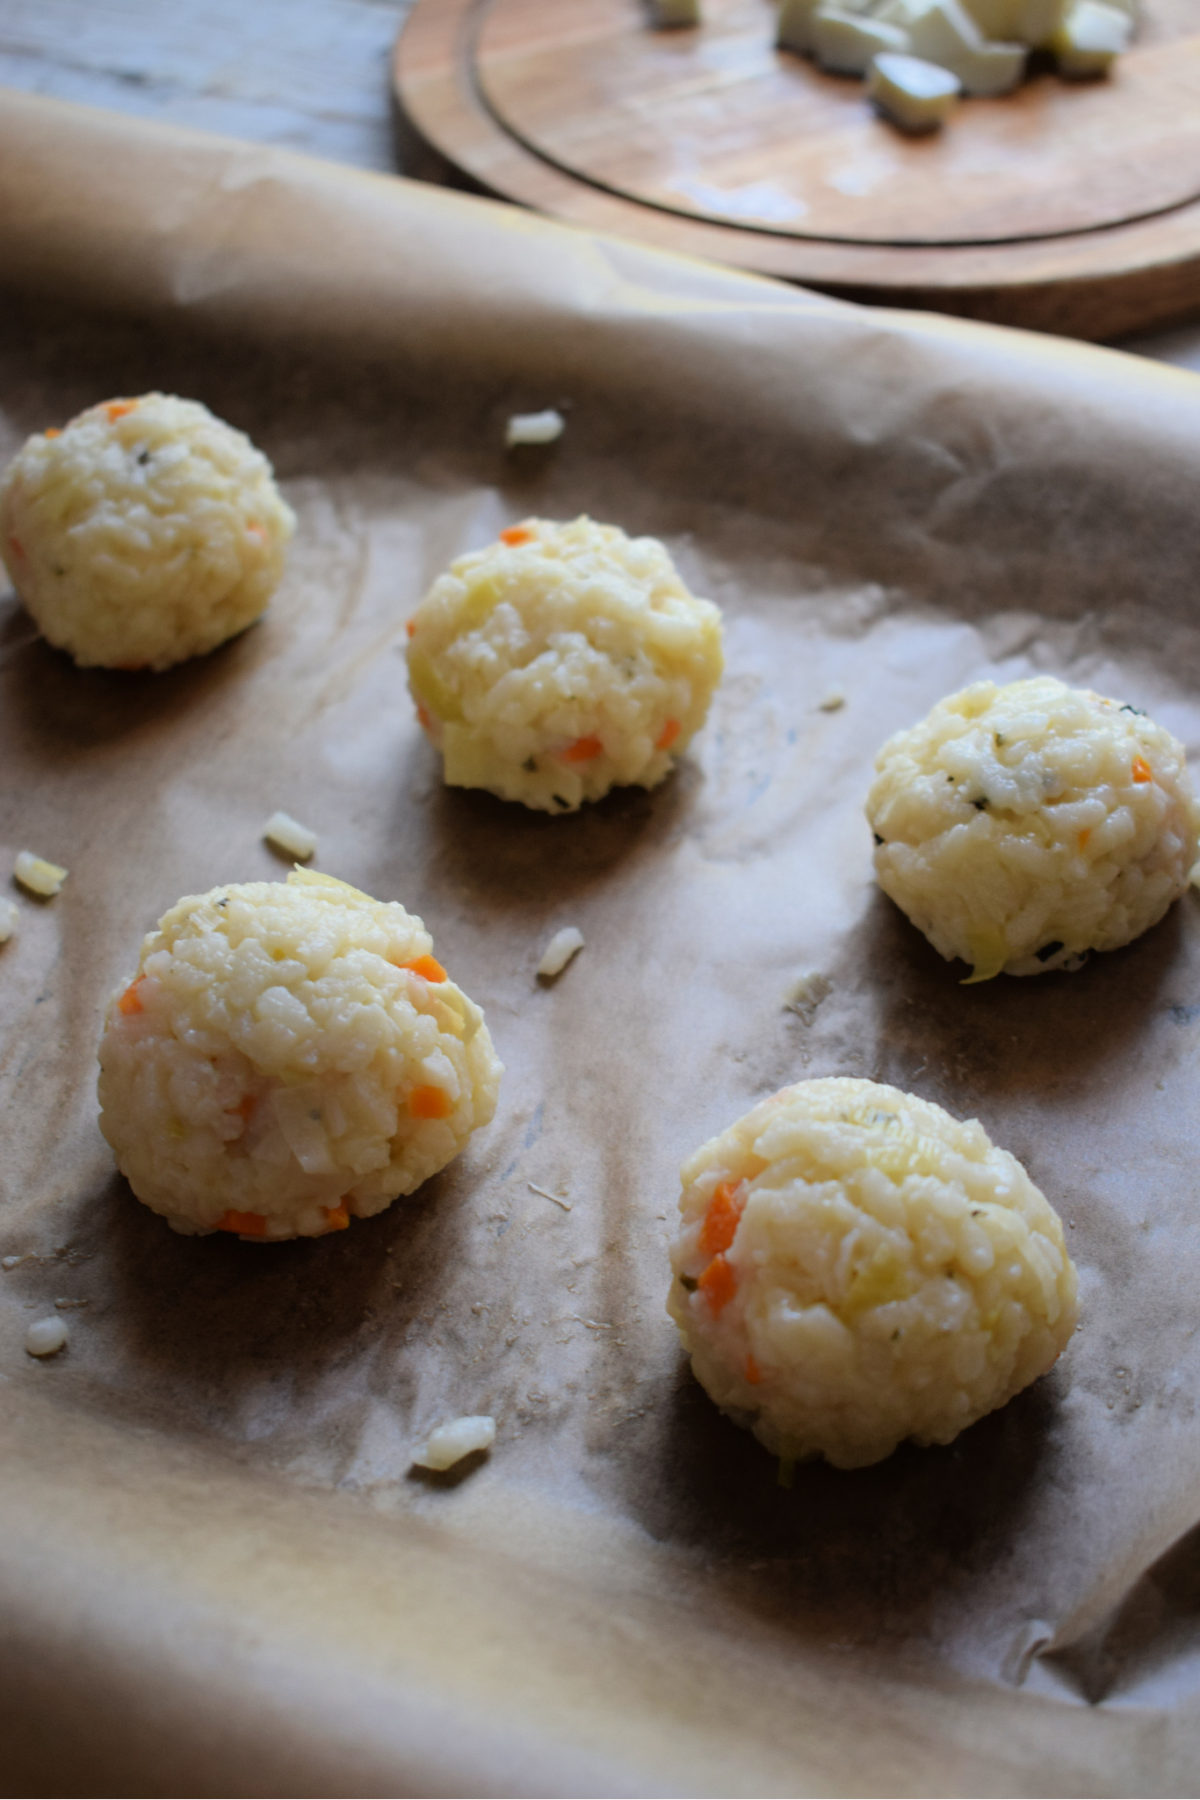 arancini balls on a plate ready to fry